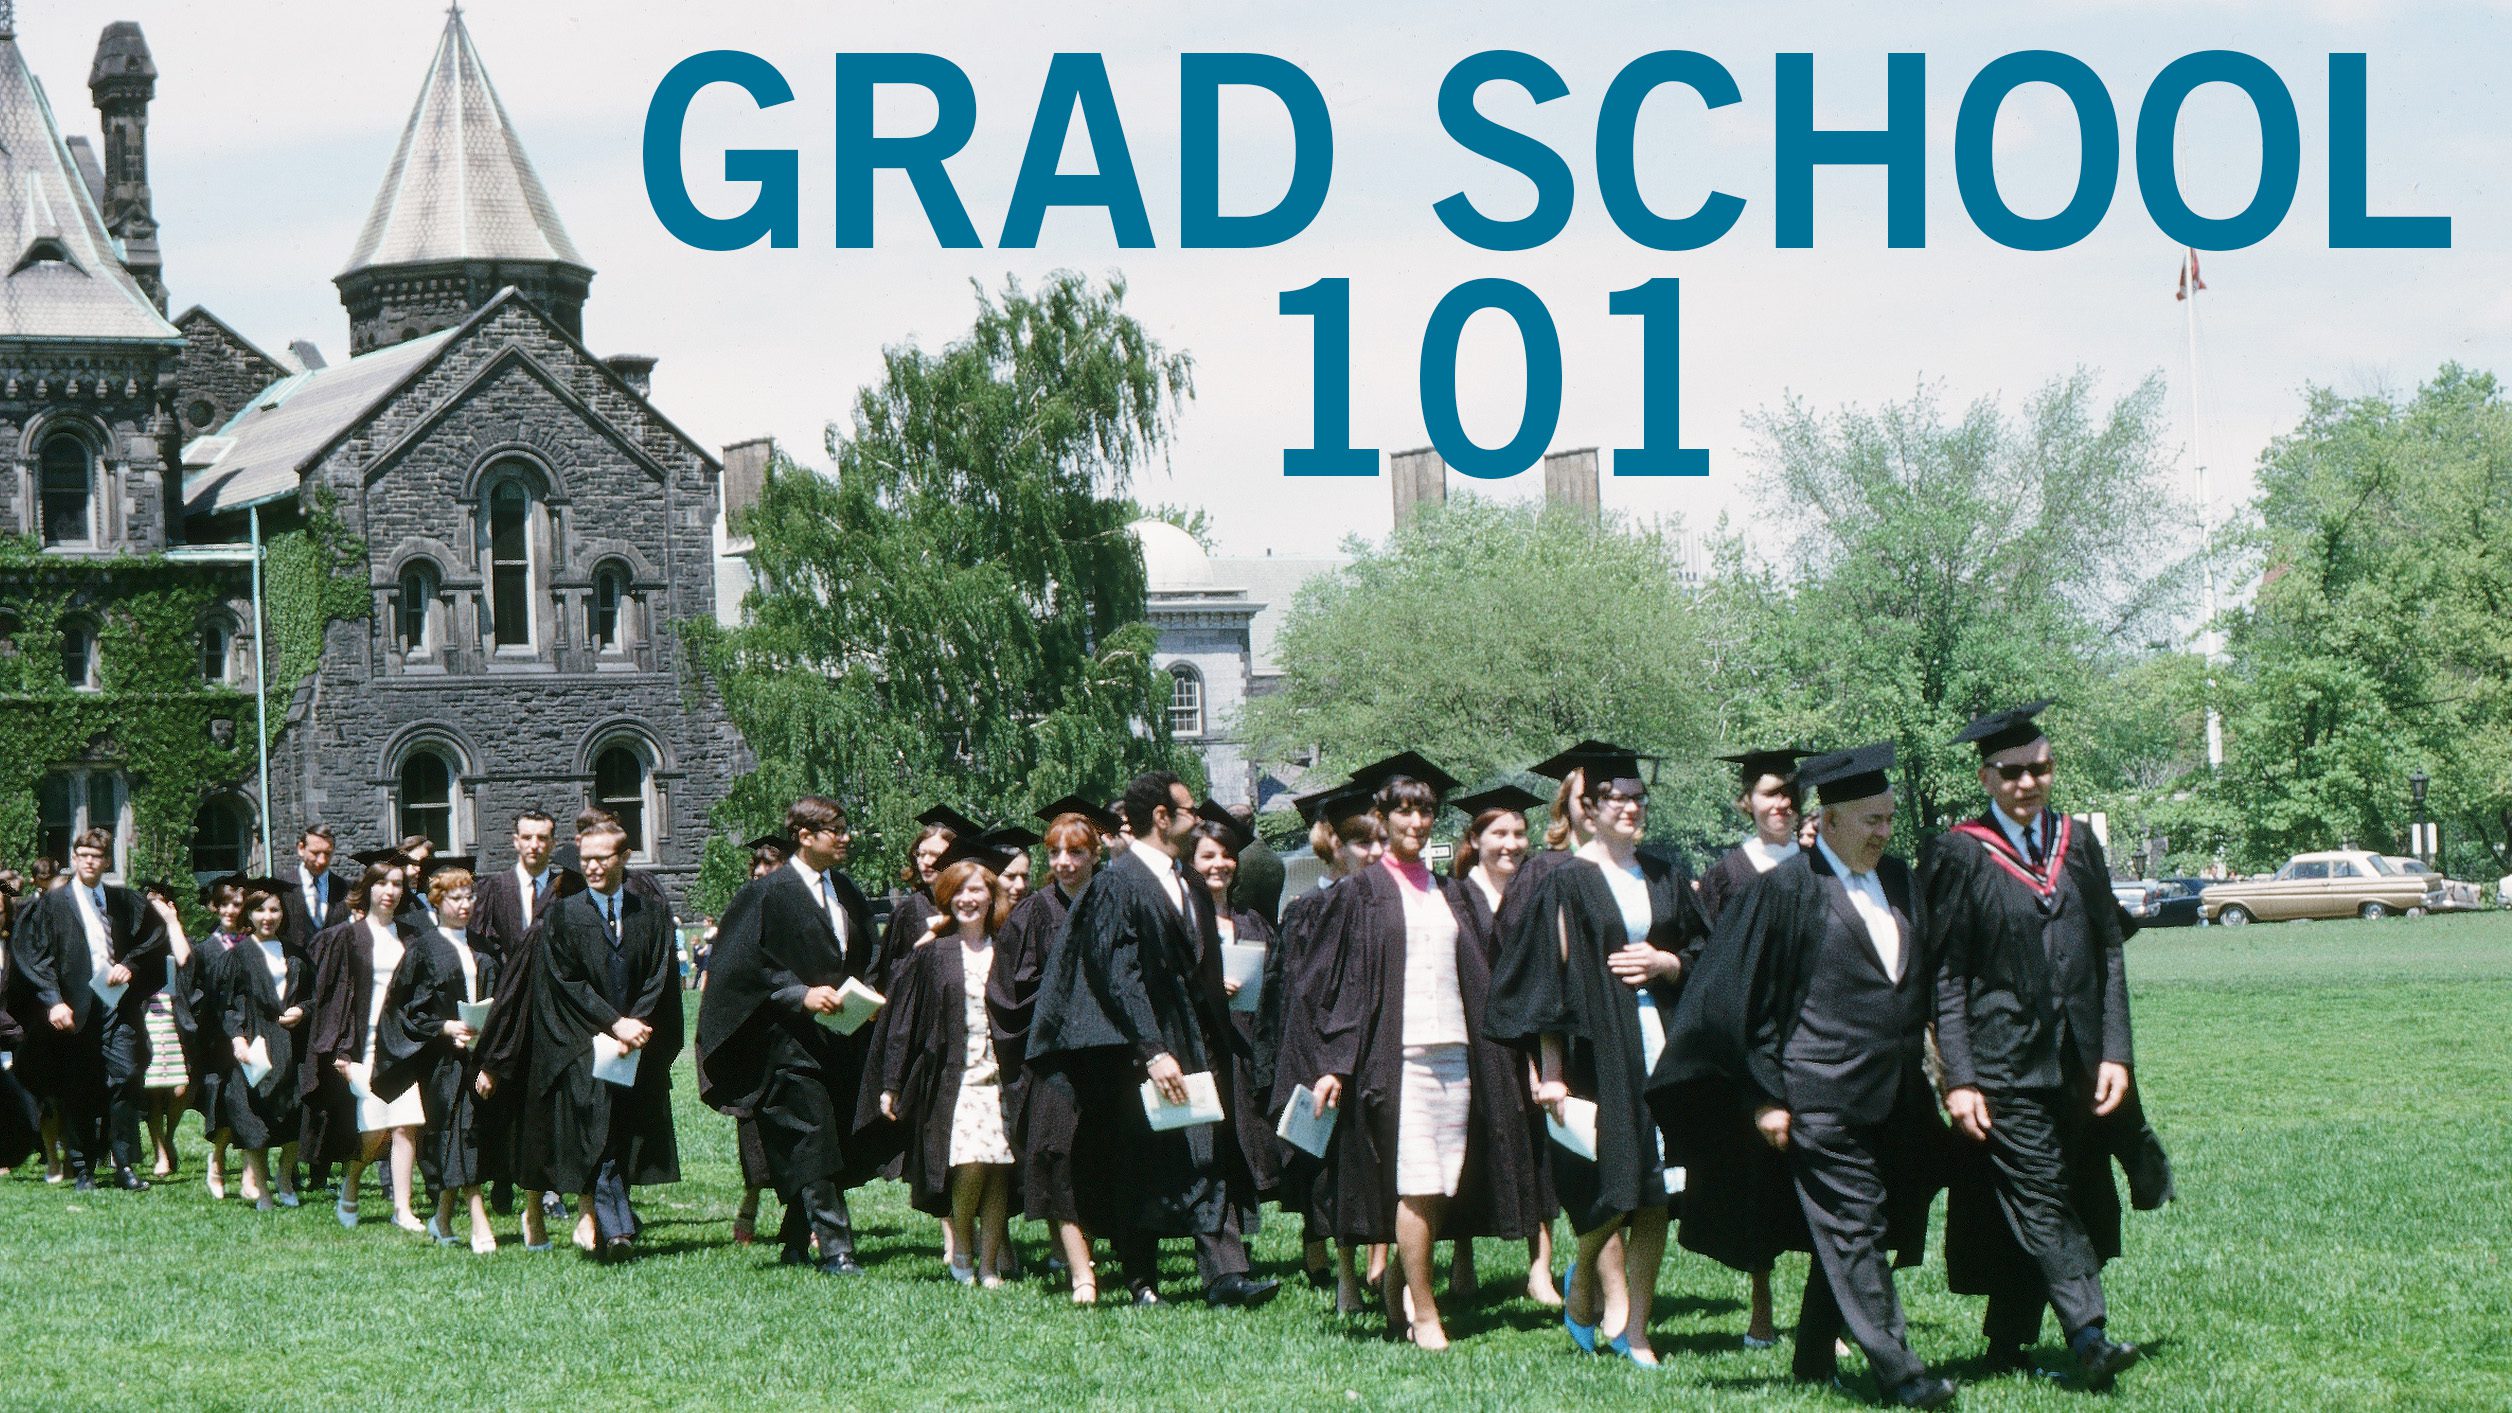 a group of students in convocation regalia walks across King's College Circle with the words "GRAD SCHOOL 101" superimposed